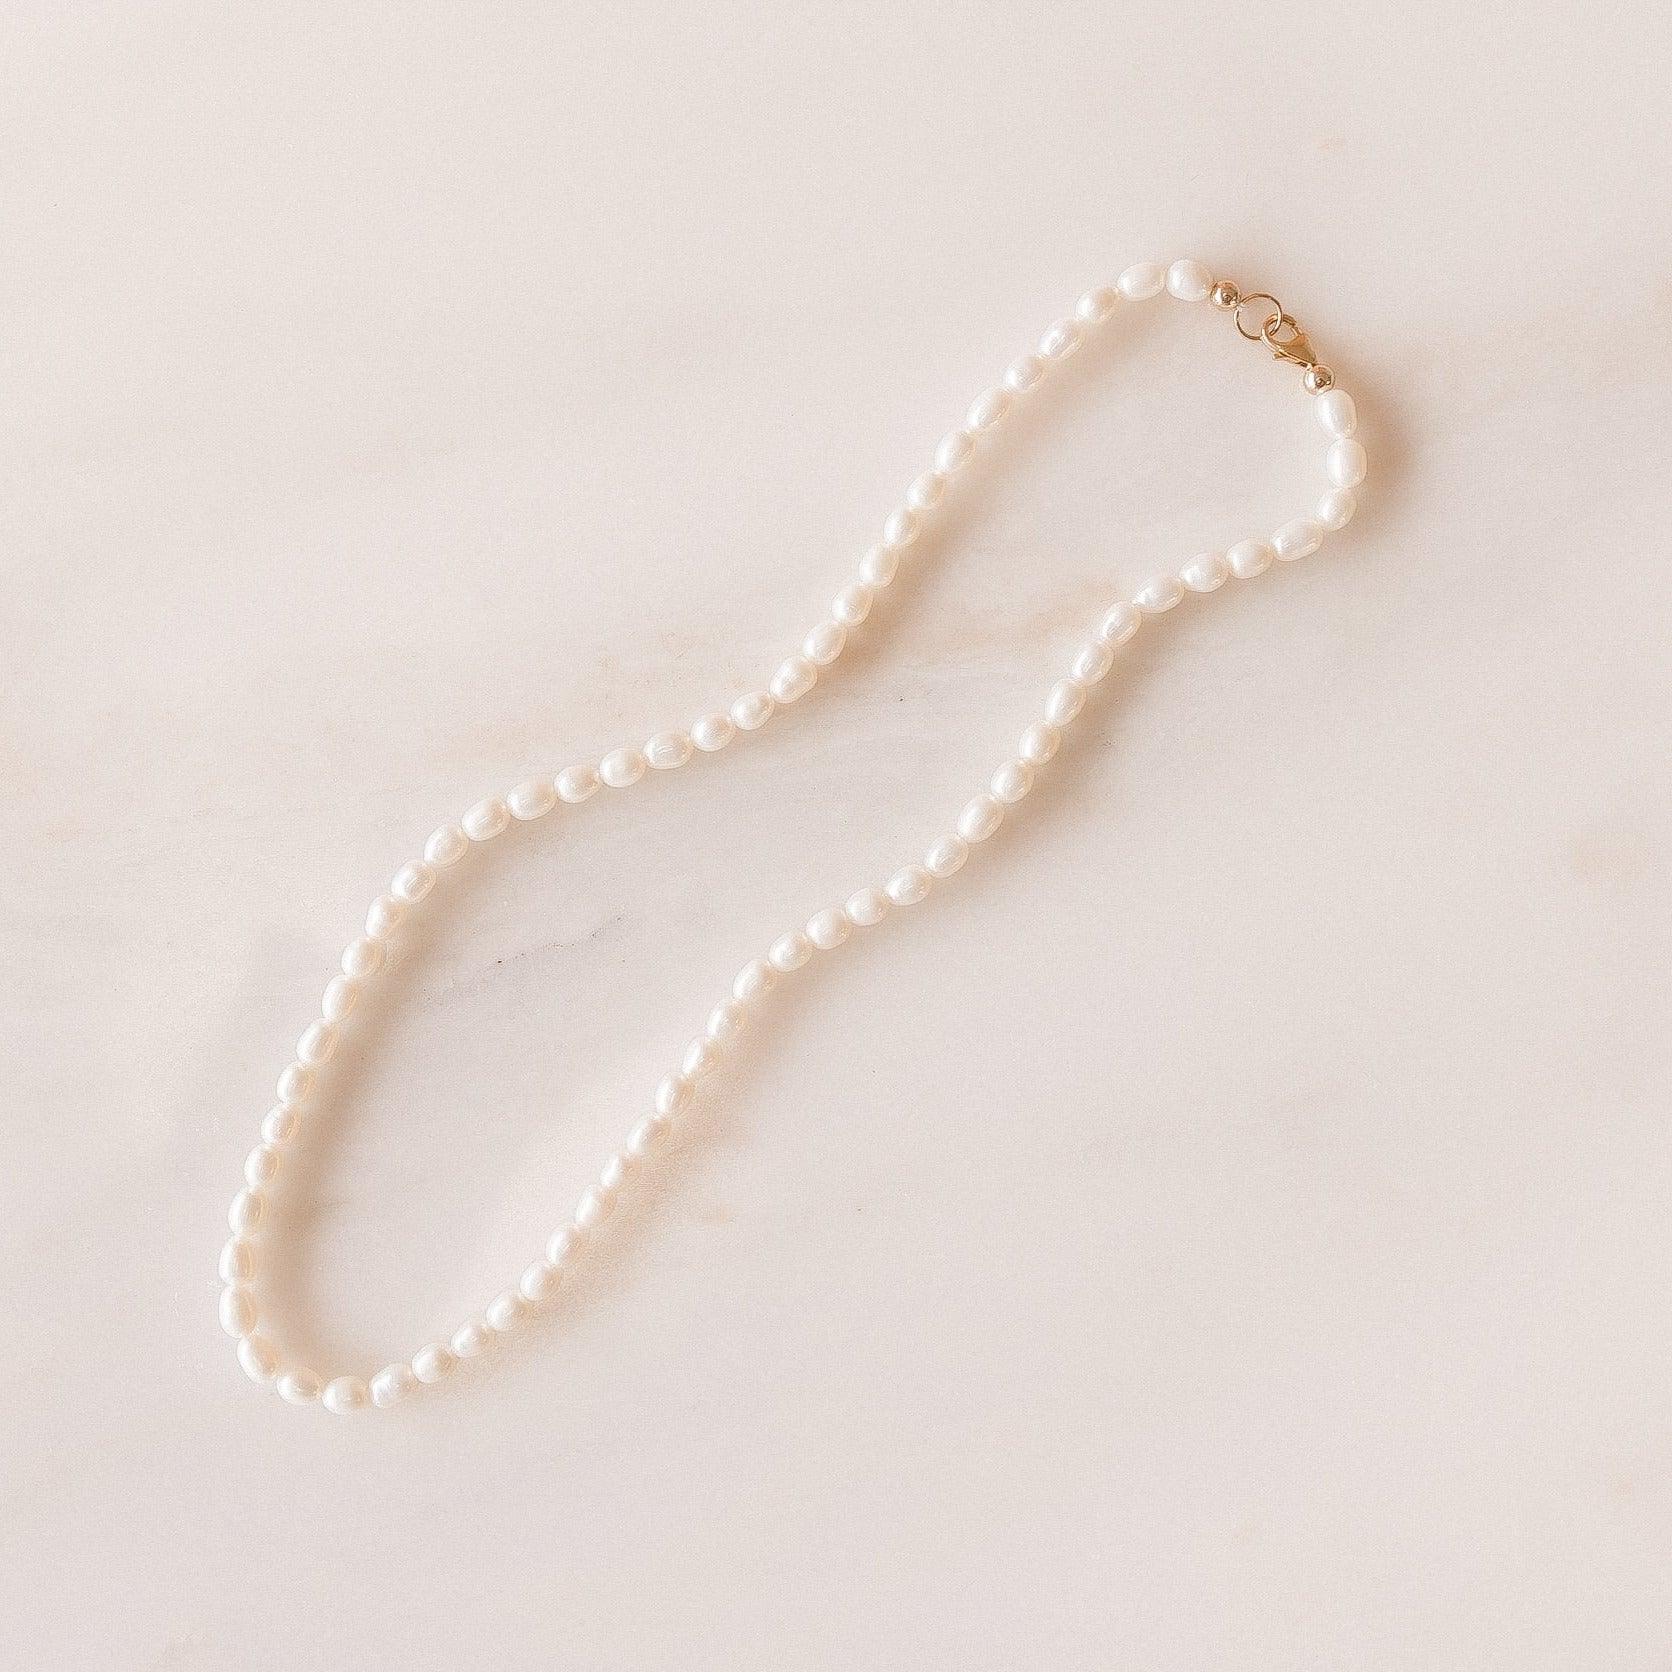 Morgan Pearl Necklace - Nolia Jewelry - Meaningful + Sustainably Handcrafted Jewelry